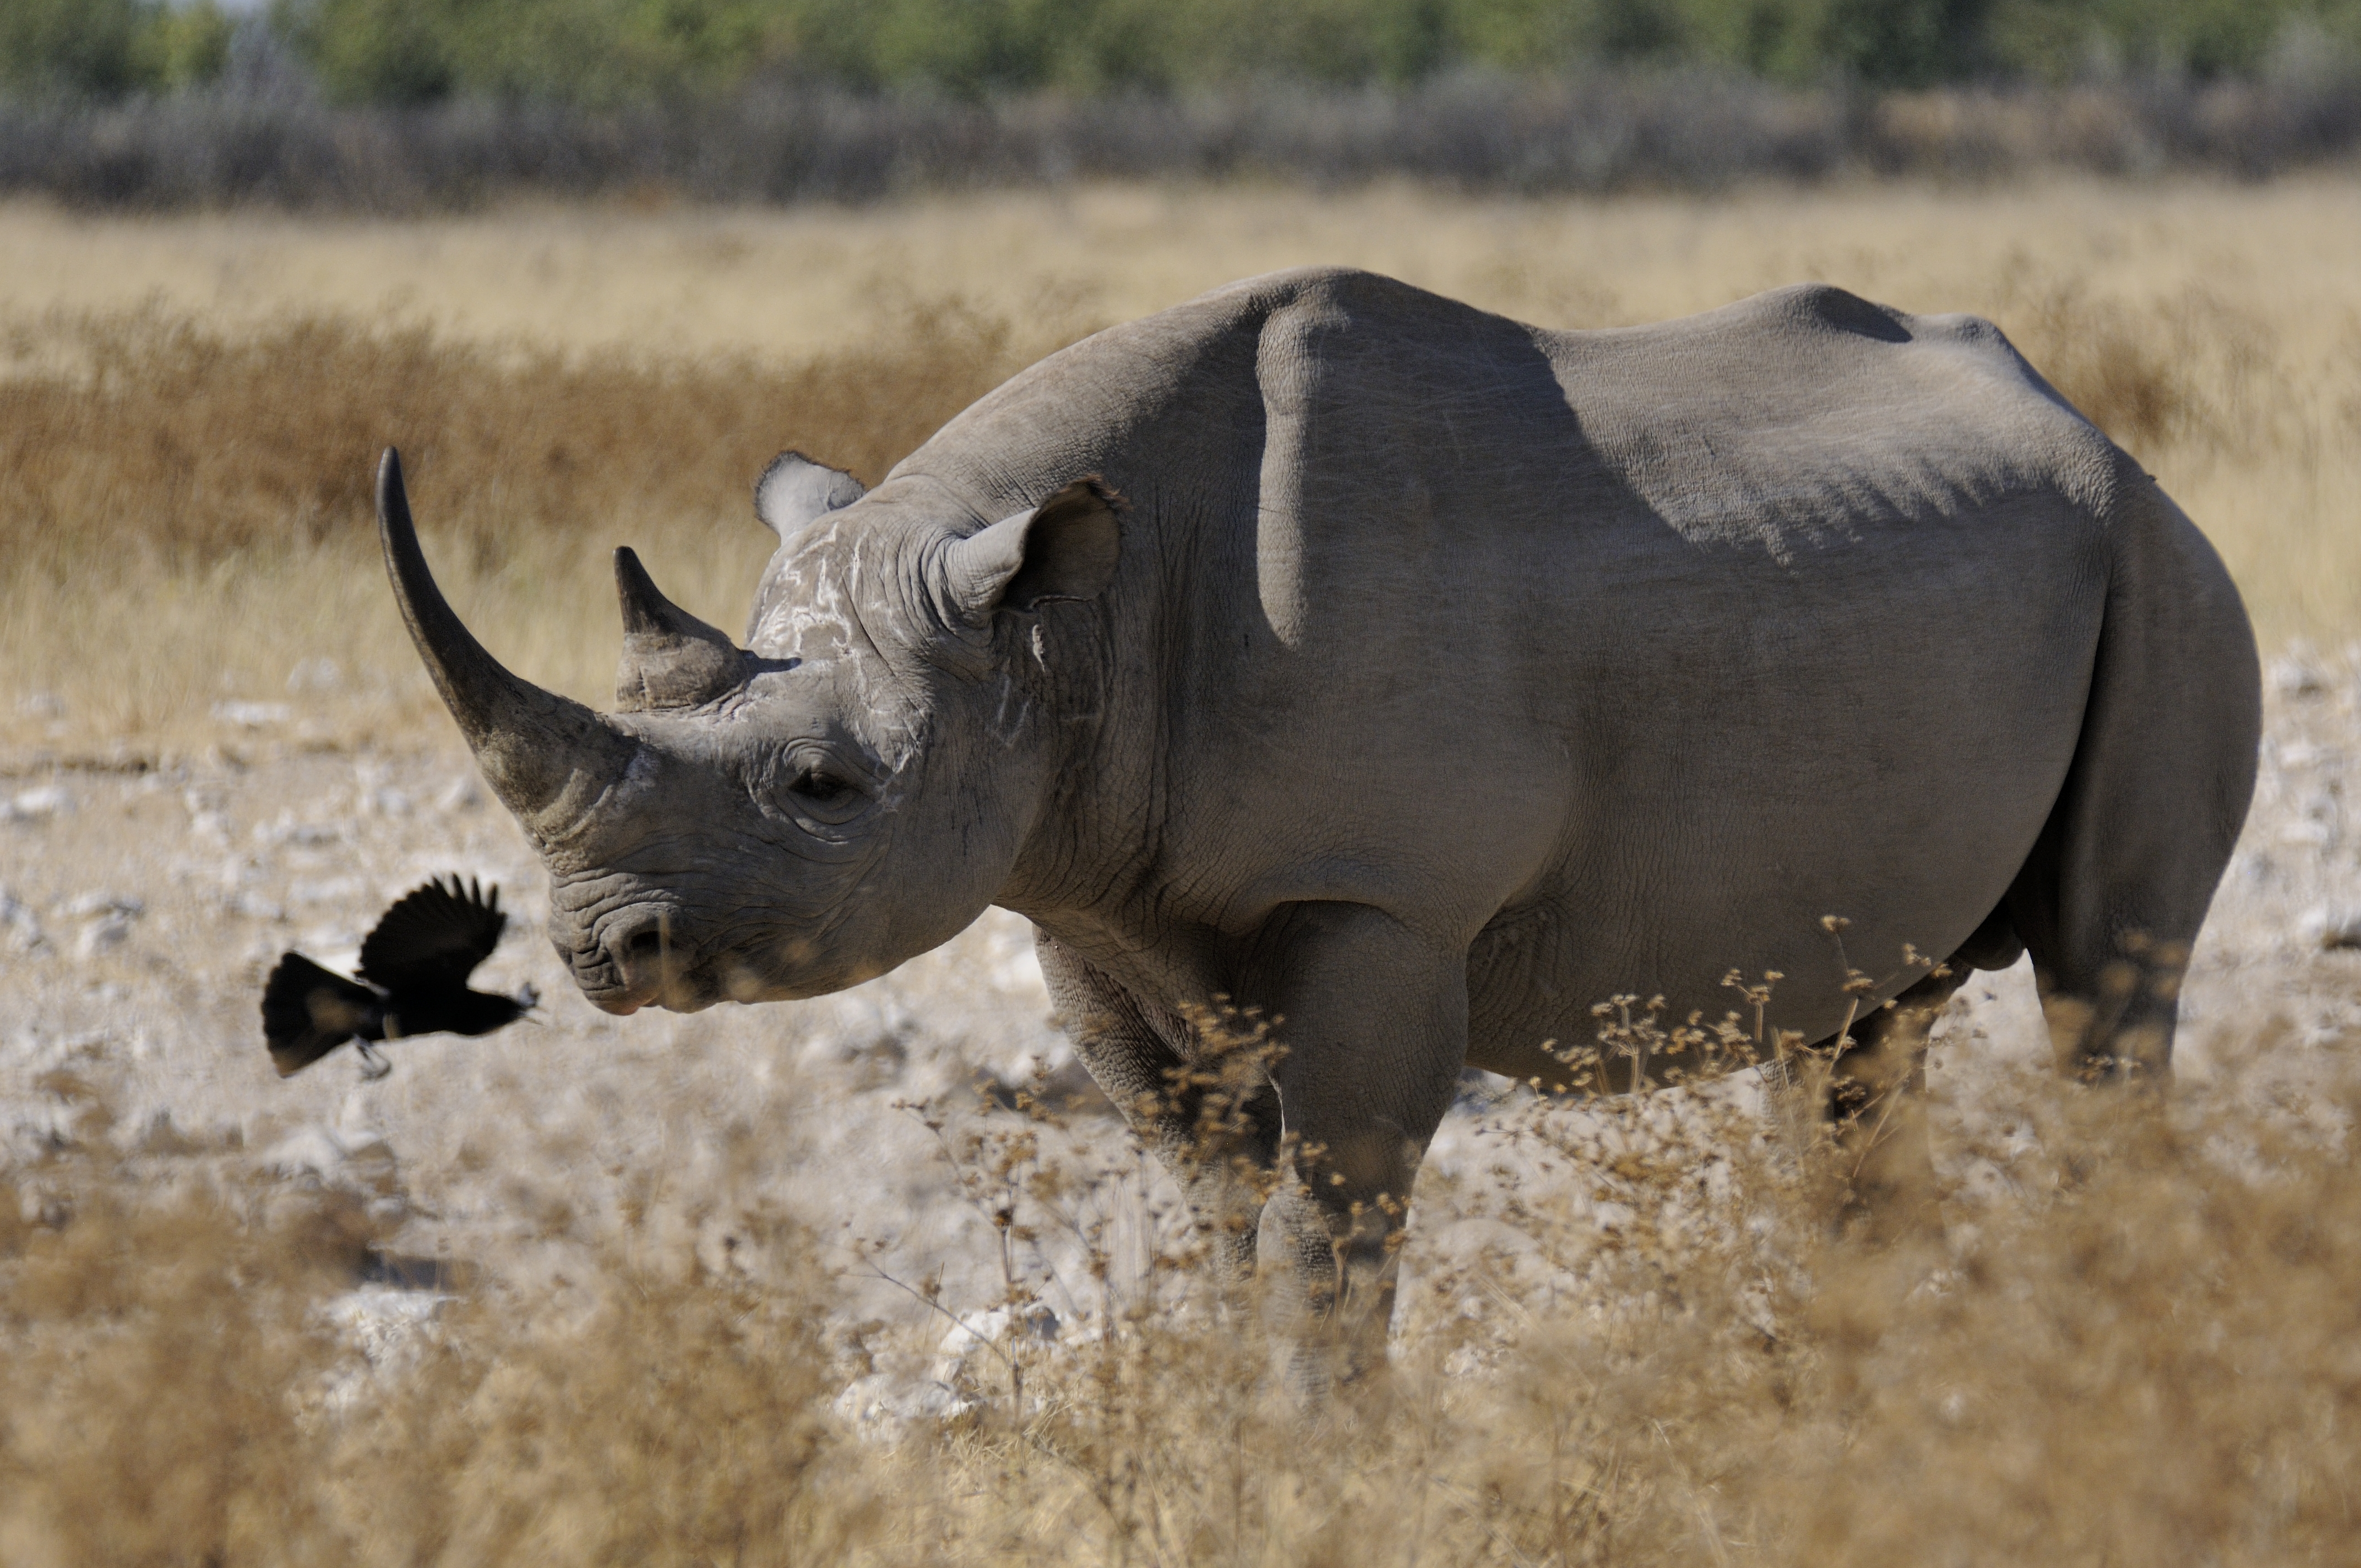 Wildlife Trade Experts Oppose Use of Synthetic Rhino Horn as Anti-Poaching ...